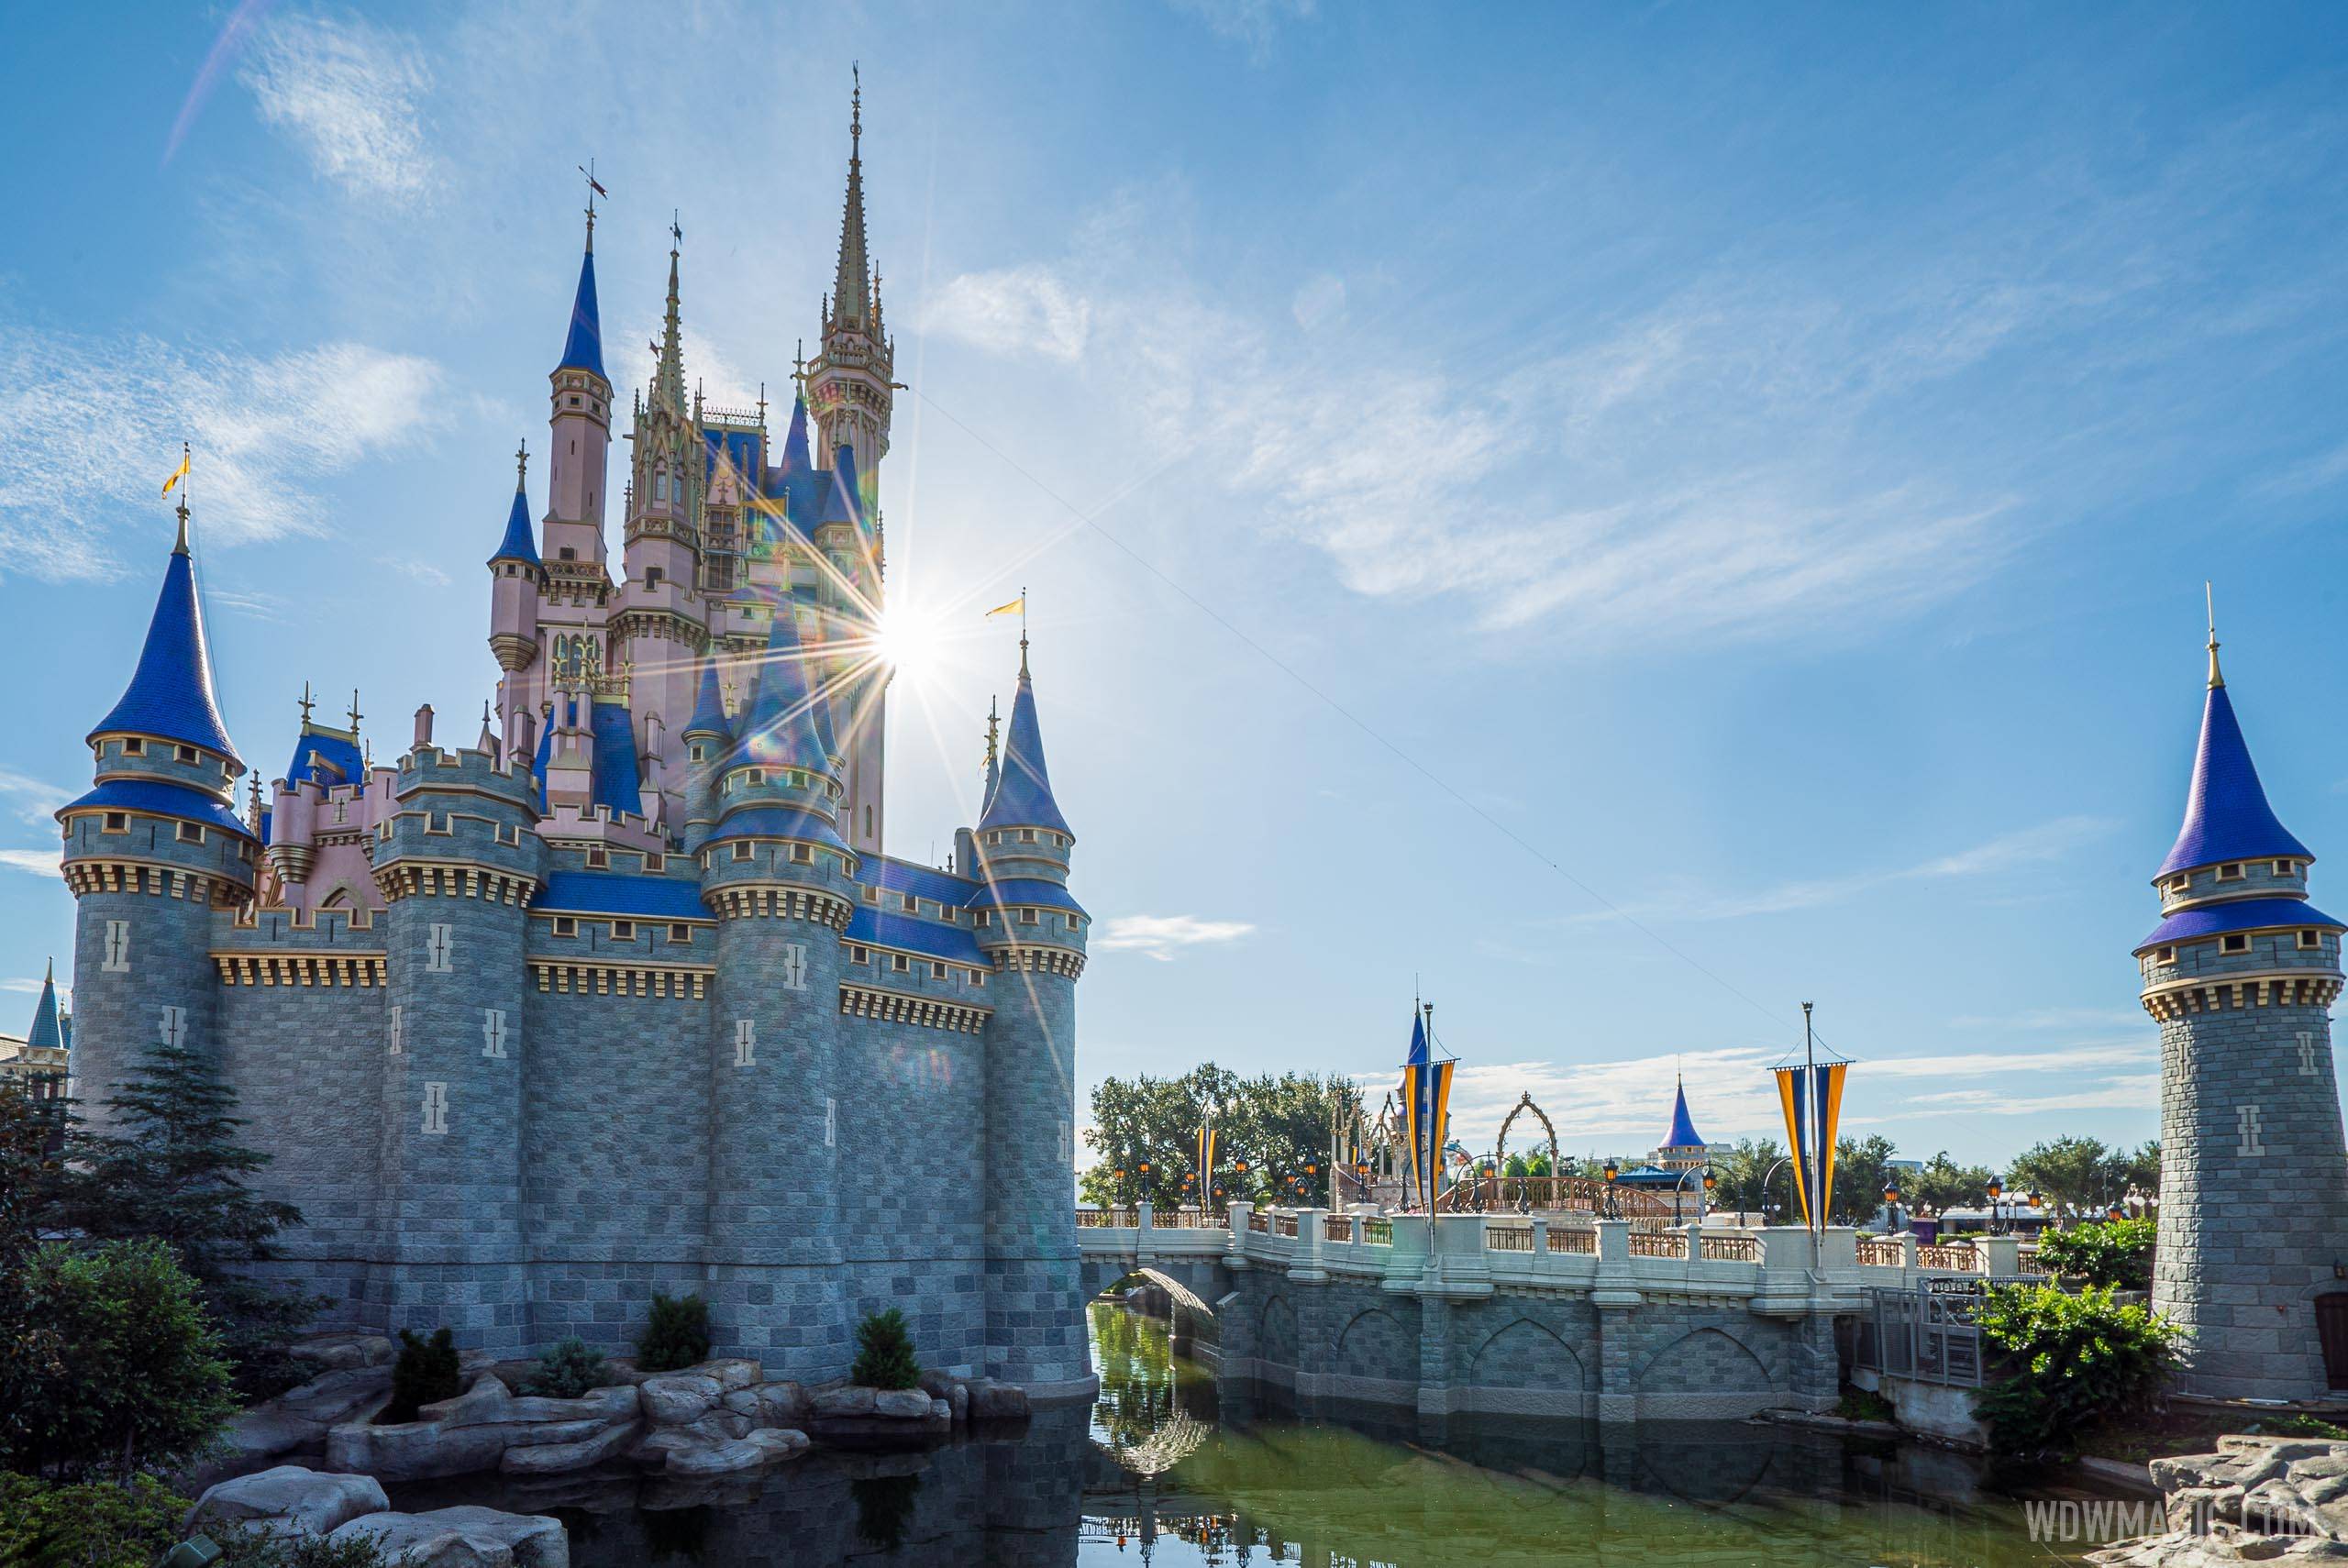 Moats around Cinderella Castle to be drained for refurbishment starting tomorrow